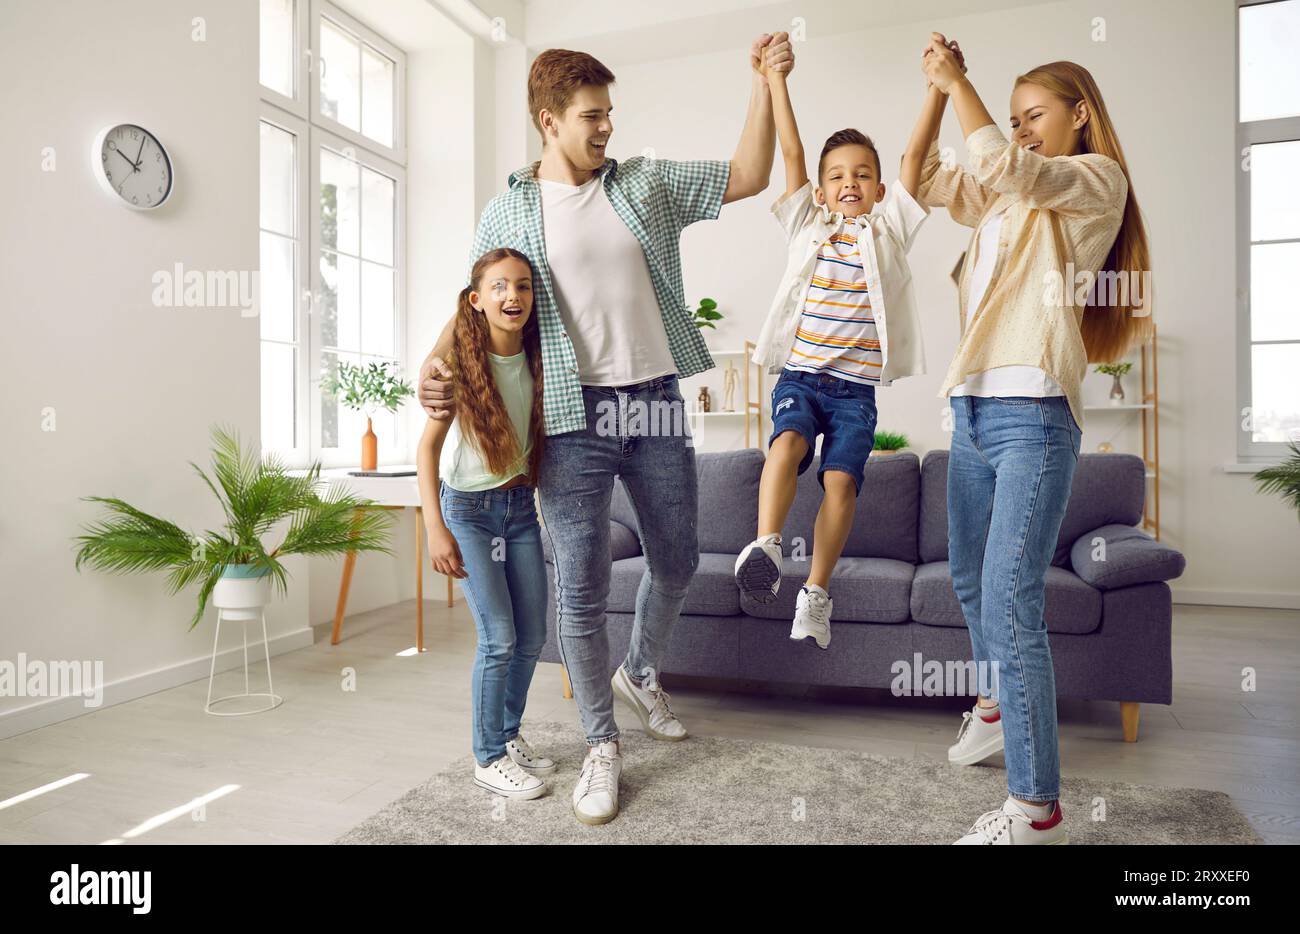 Happy family are playing together, boy is jumping from sofa holding hands parents in living room. Stock Photo